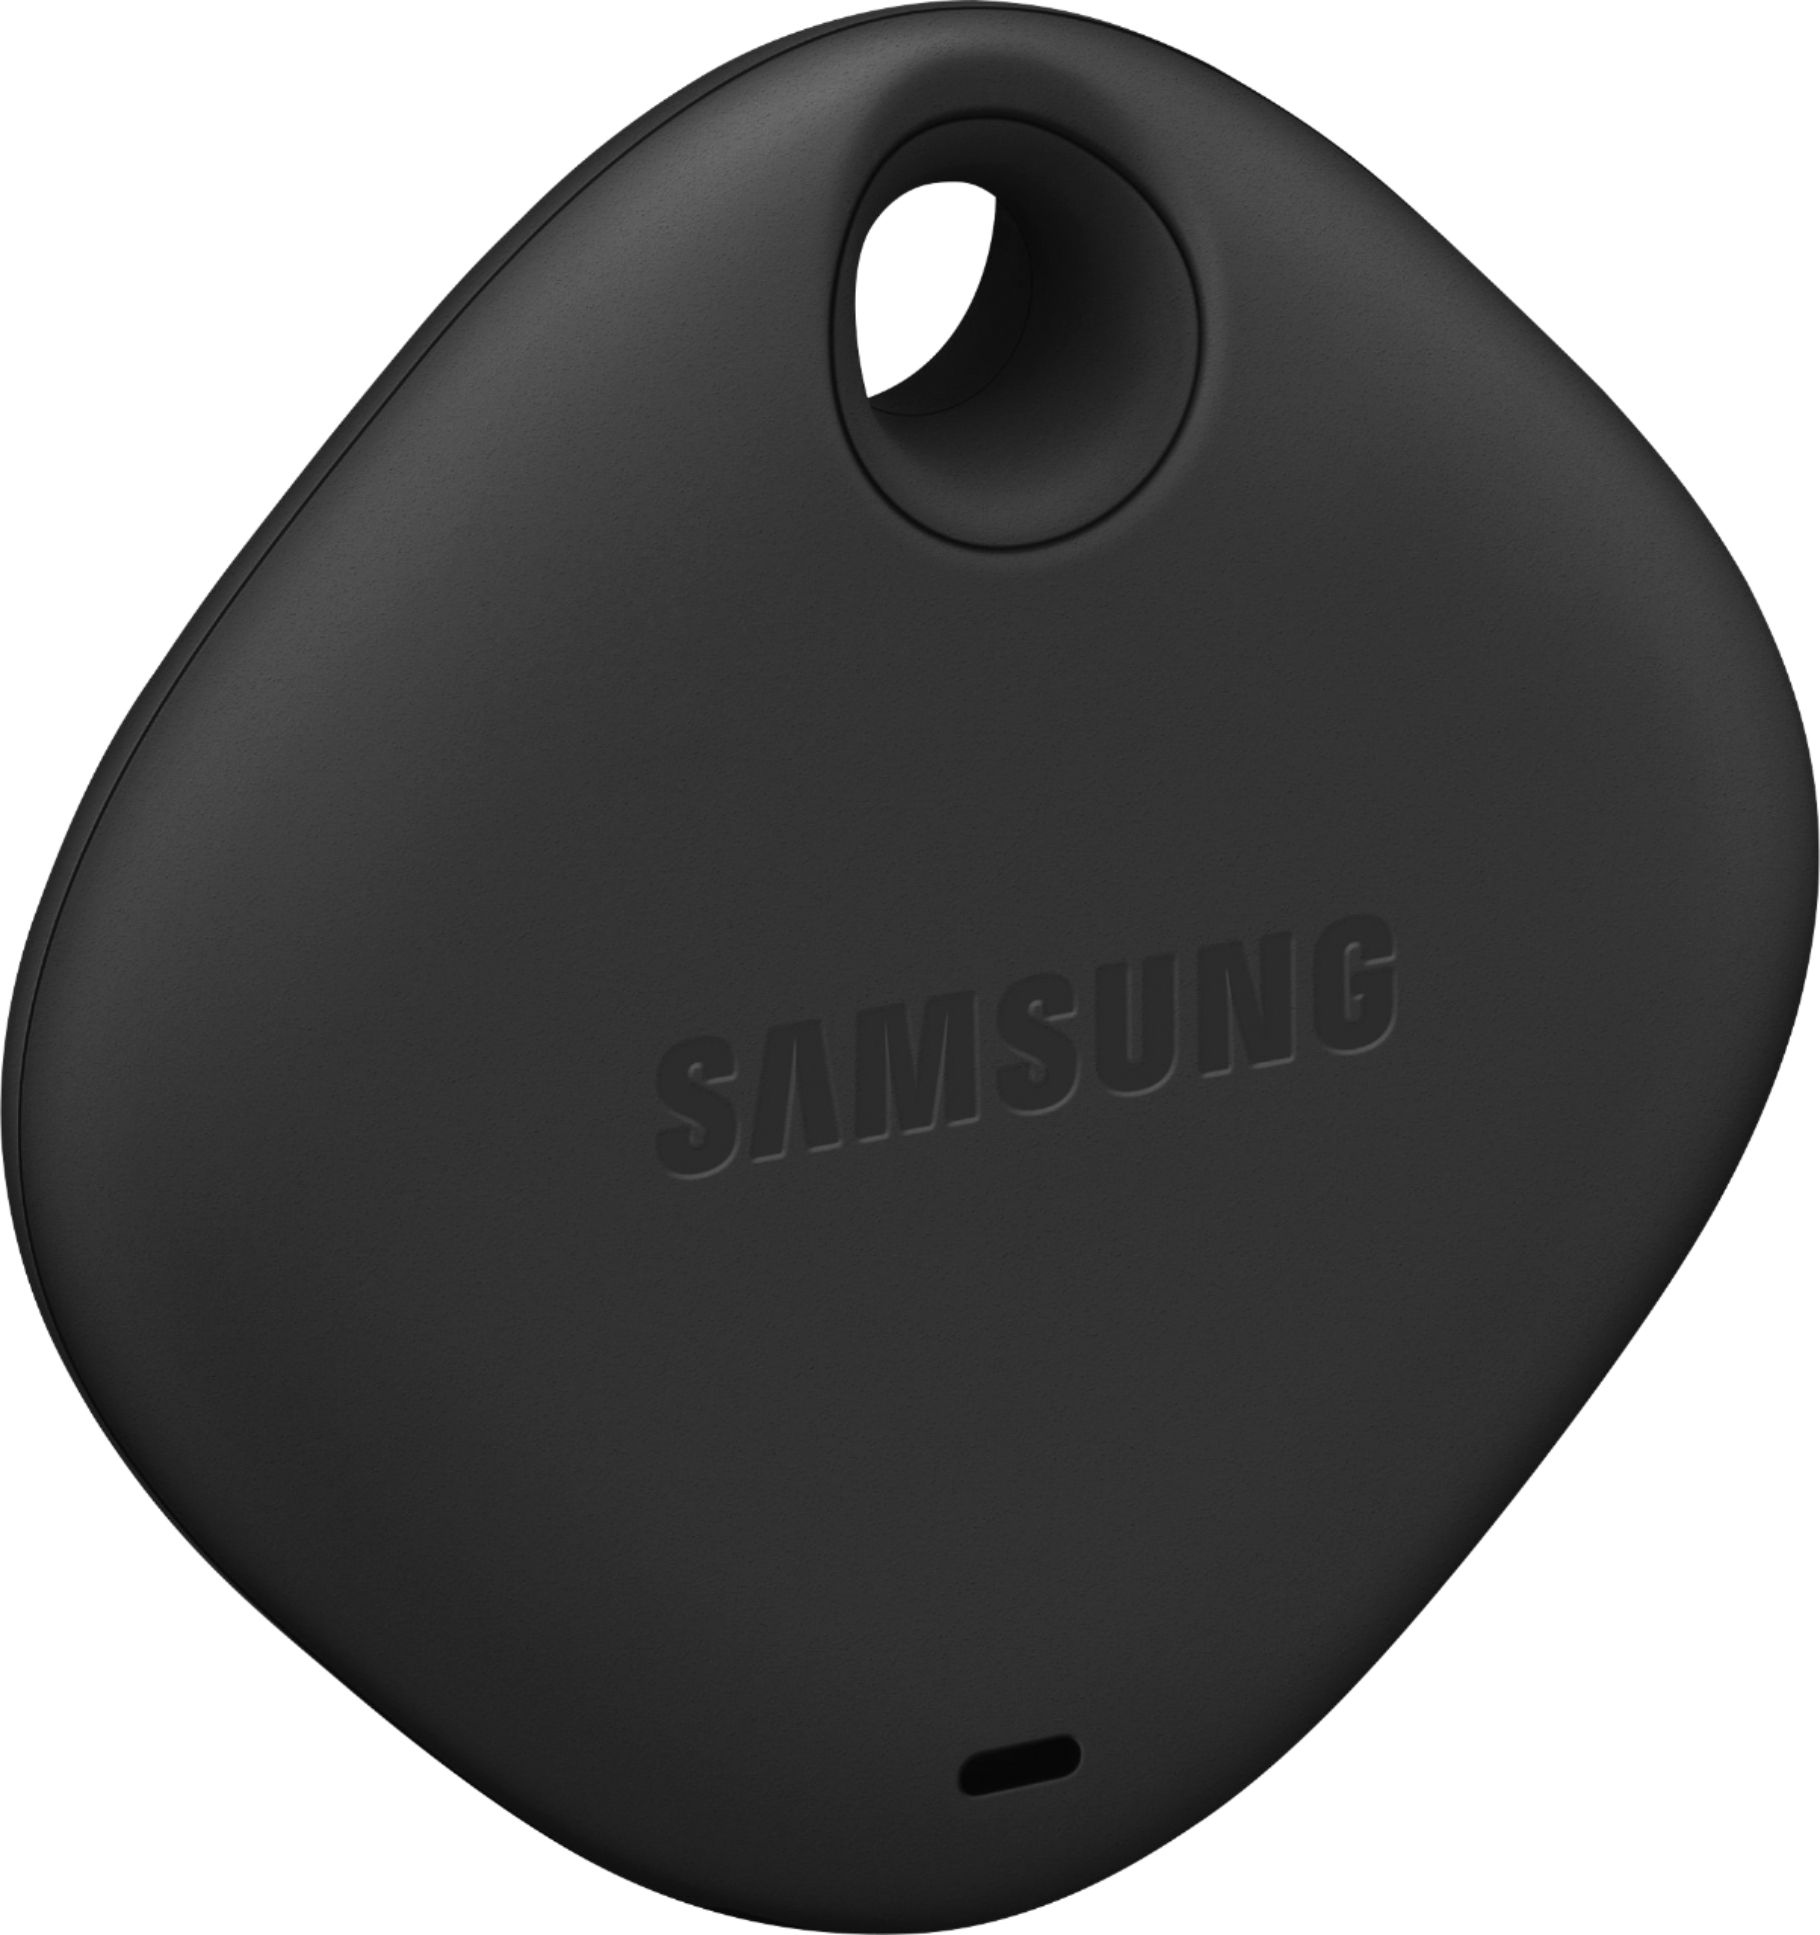 Official Samsung White SmartTag2 Bluetooth Compatible Trackers - 2 Pack